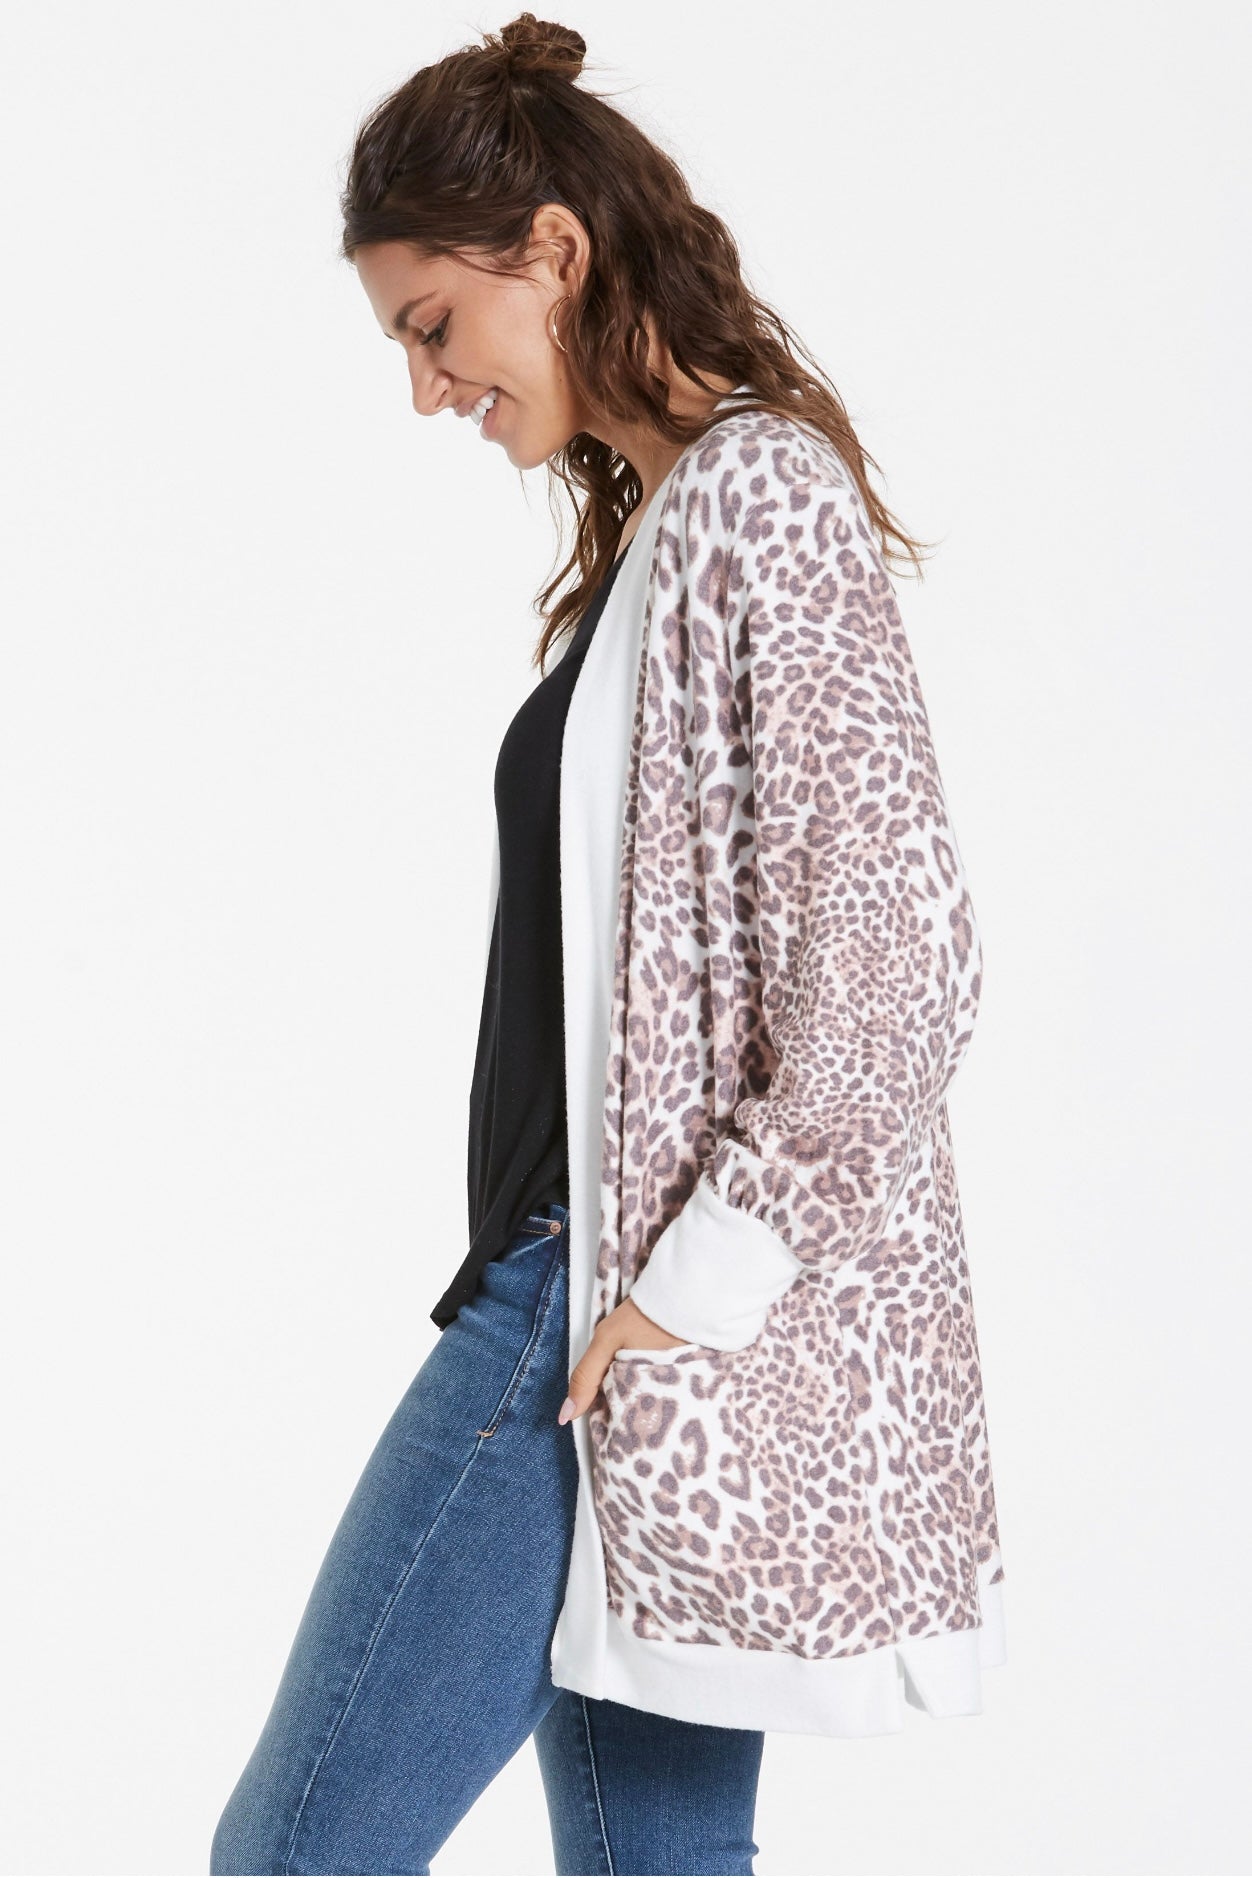 HEATHER LONG SLEEVE LEOPARD PRINT OPEN CARDI WITH POCKETS